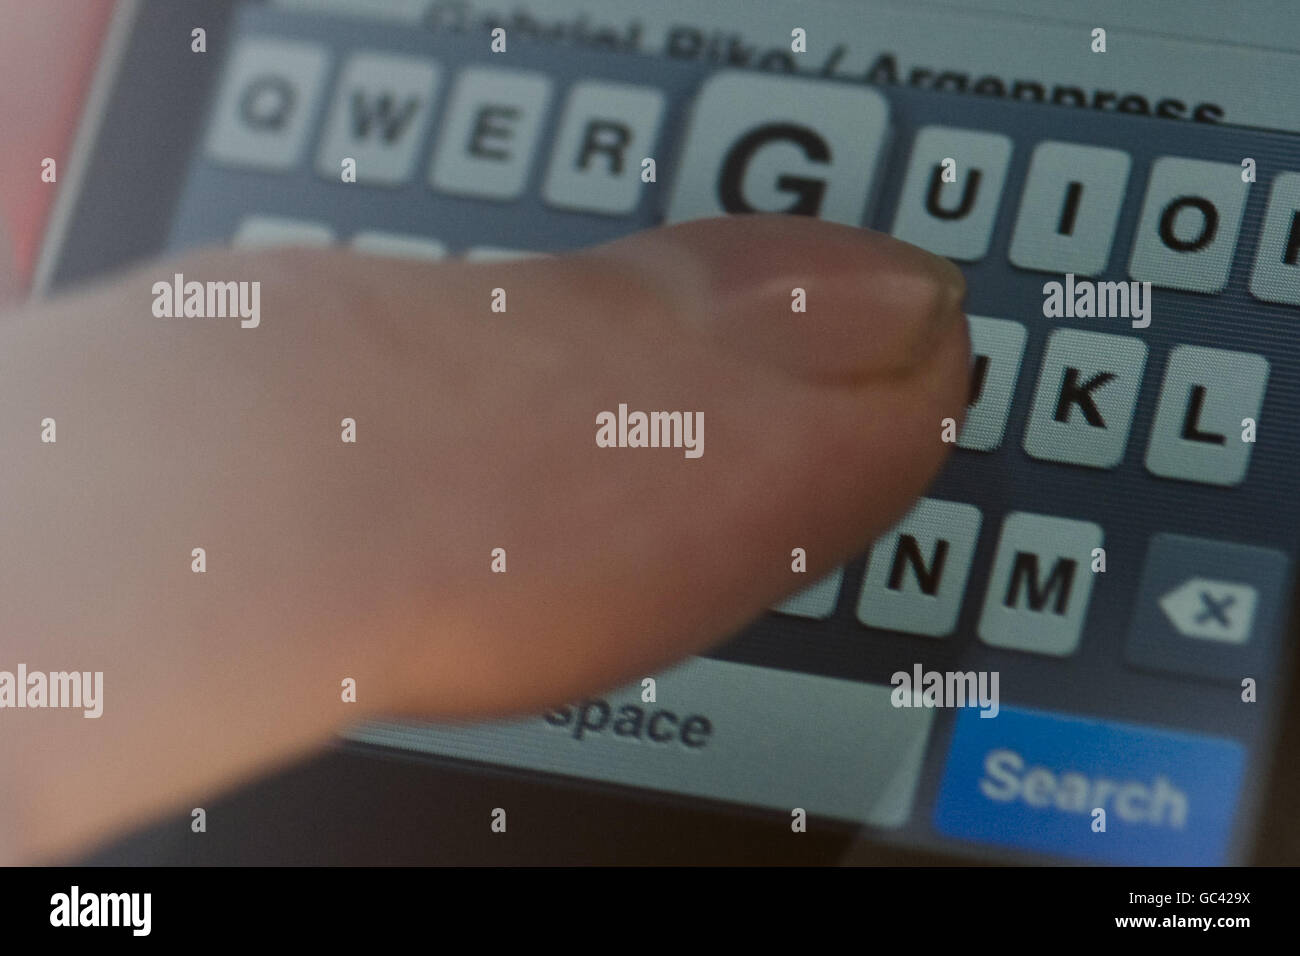 Technology. A touchpad qwerty keyboard on an ipod touch Stock Photo